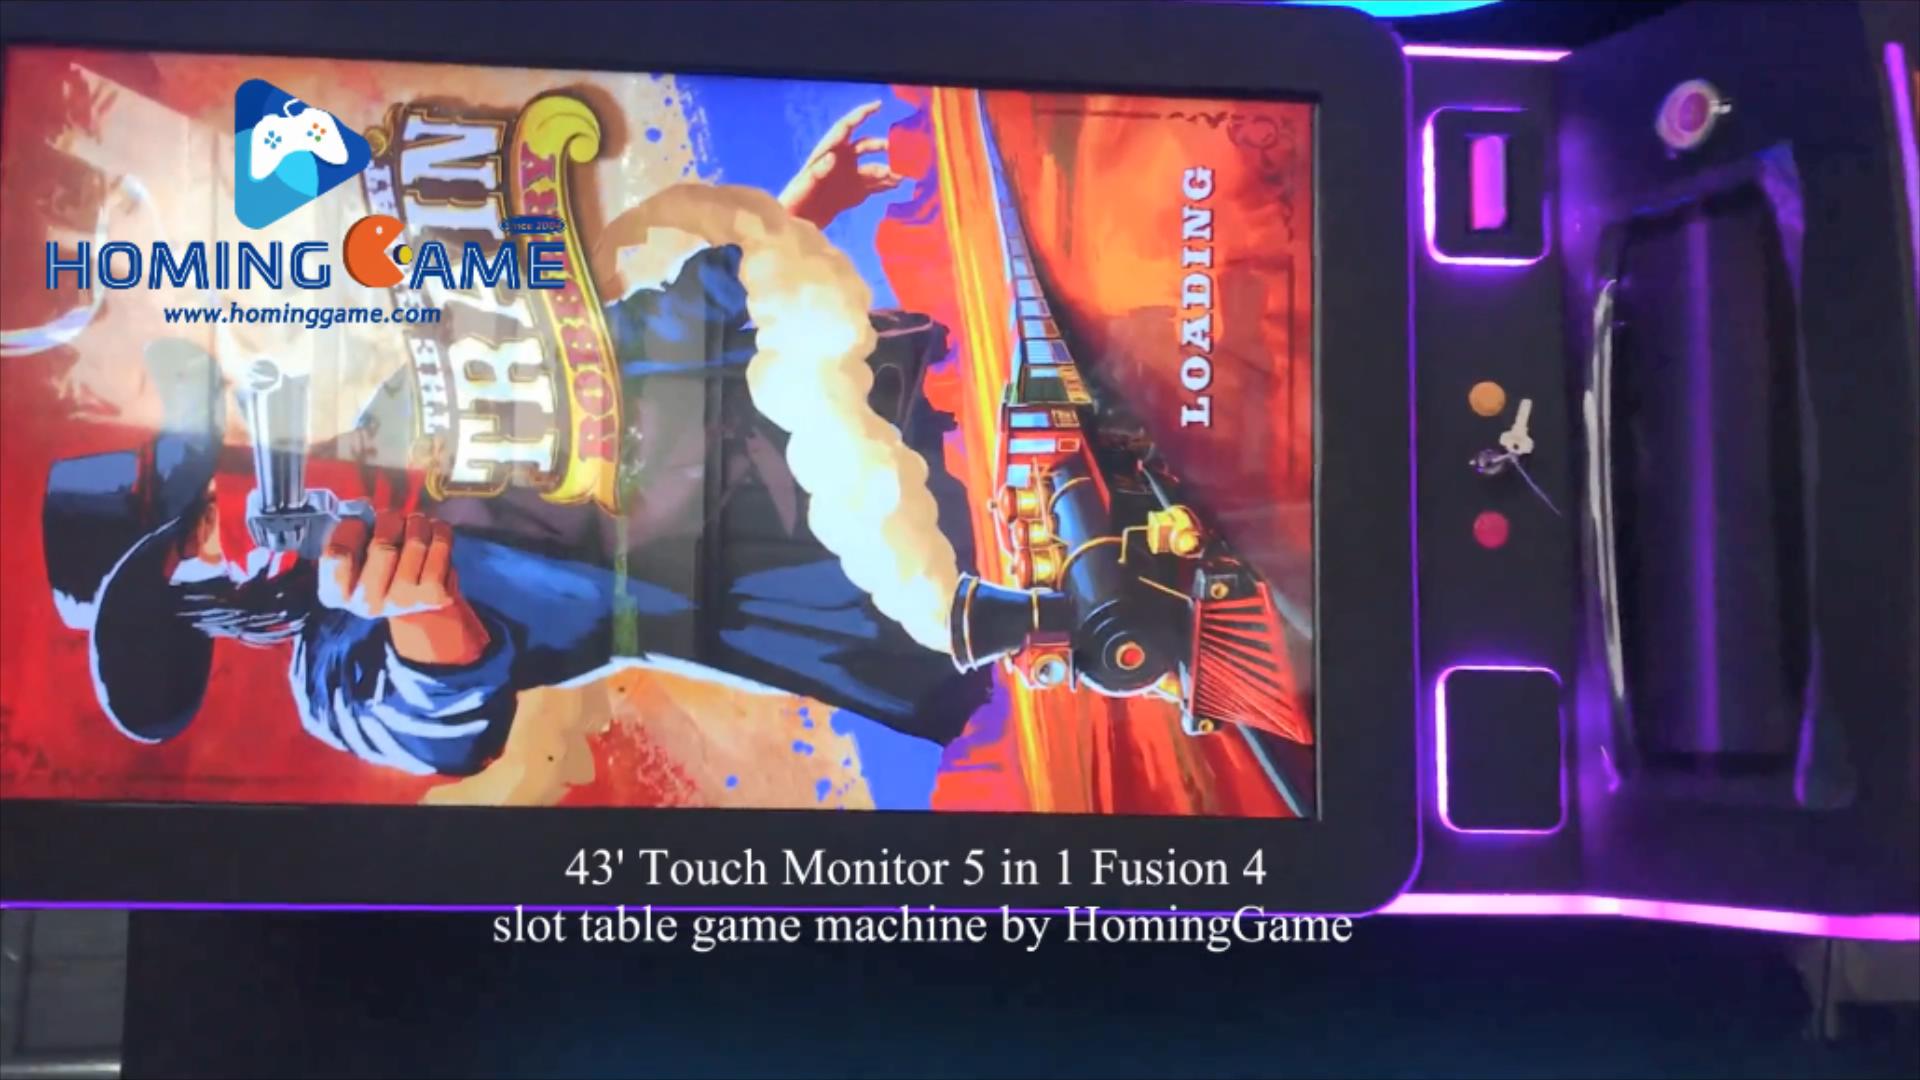 2021 Hot Sale 43' Touch 5 in 1 Fusion 4 Slot Table Game Machine By HomingGame(Order call whatsapp:+8618688409495),fusion 4 slot table game machine,5 in 1 fusion 4 slot table game machine,,8 in 1 fire link slot game machine,slot table game machine,,8 in 1 43' touch screen fire link slot game machine,43' touch screen fire link slot game machine,43' touch monitor fire link slot table game machine,43' curve touch monitor fire link slot gaming machine,dragon link slot game machine,panda link slot game machine,golden buffalo slot game machine,fusion 4 slot game machine,ultimate fire link,ultimate fire link slot game machine,ultimate fire link slot game,fire link slot game machine,fire link,ultimate fire link slot gaming machine,ultimate fire link slot table gaming machine,slot game,slot table game,slot gaming machine,game machine,arcade game machine,coin operated game machine,arcade game machine for sale,amsuement machine,entertainment game machine,family entertainment game machine,hominggame,www.gametube.hk,indoor game machine,casino,gambling machine,electrical game machine,slot,slot game machine for sale,slot table for sale,simulator game machine,video game machine,video game,video game machine for sale,hominggame fire link slot game,slot gaming